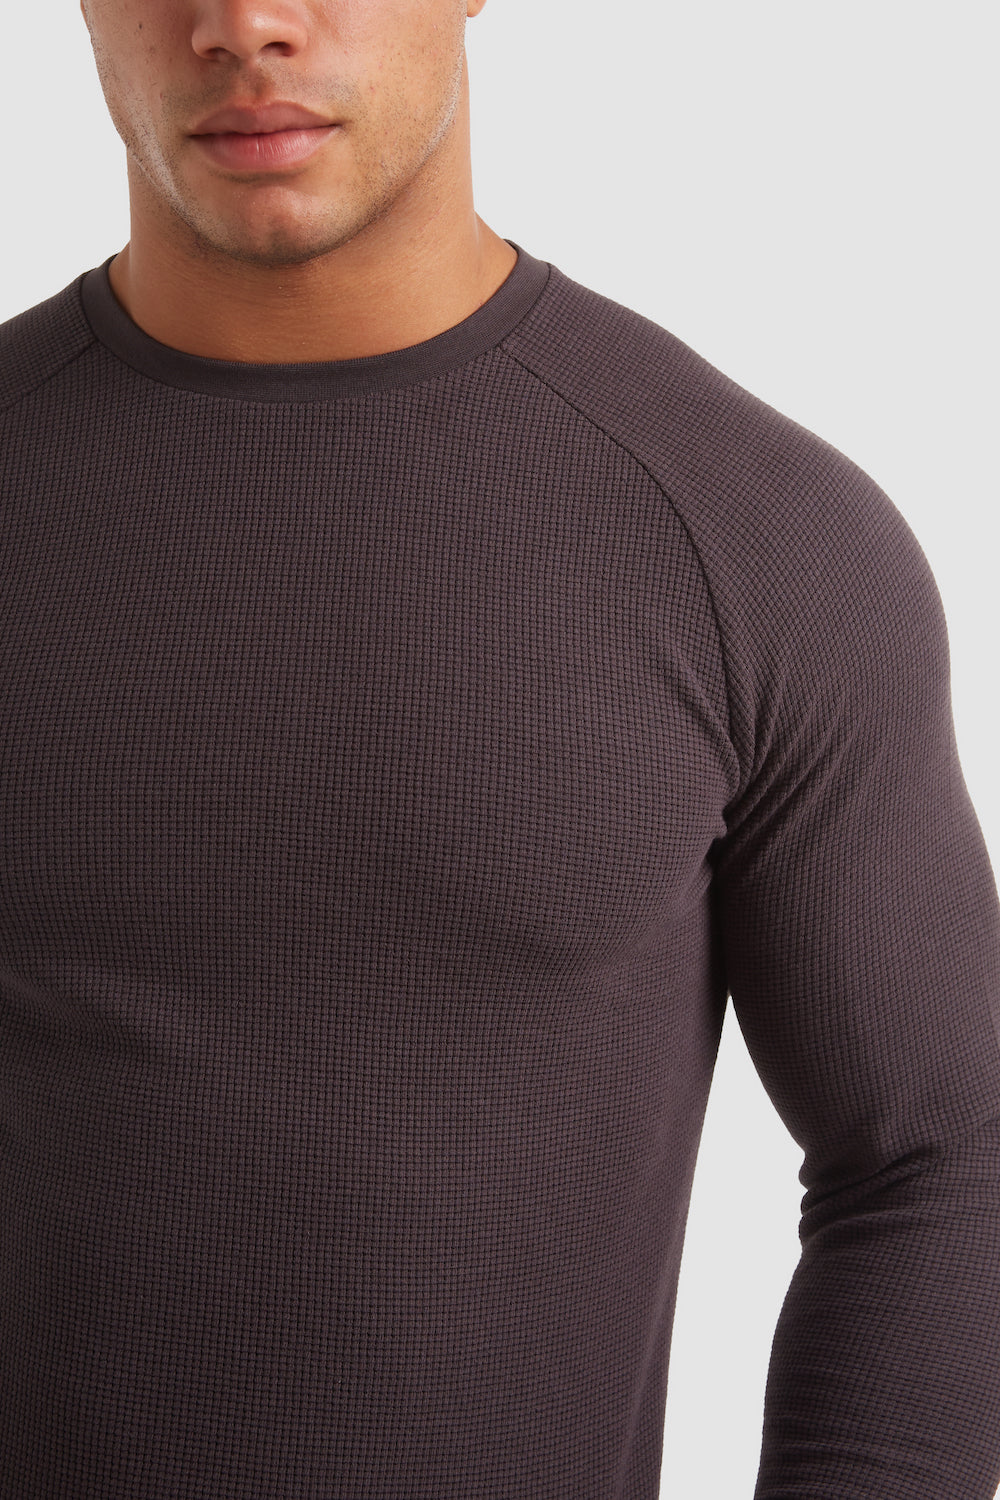 Waffle T-Shirt in Dark Lead - TAILORED ATHLETE - ROW